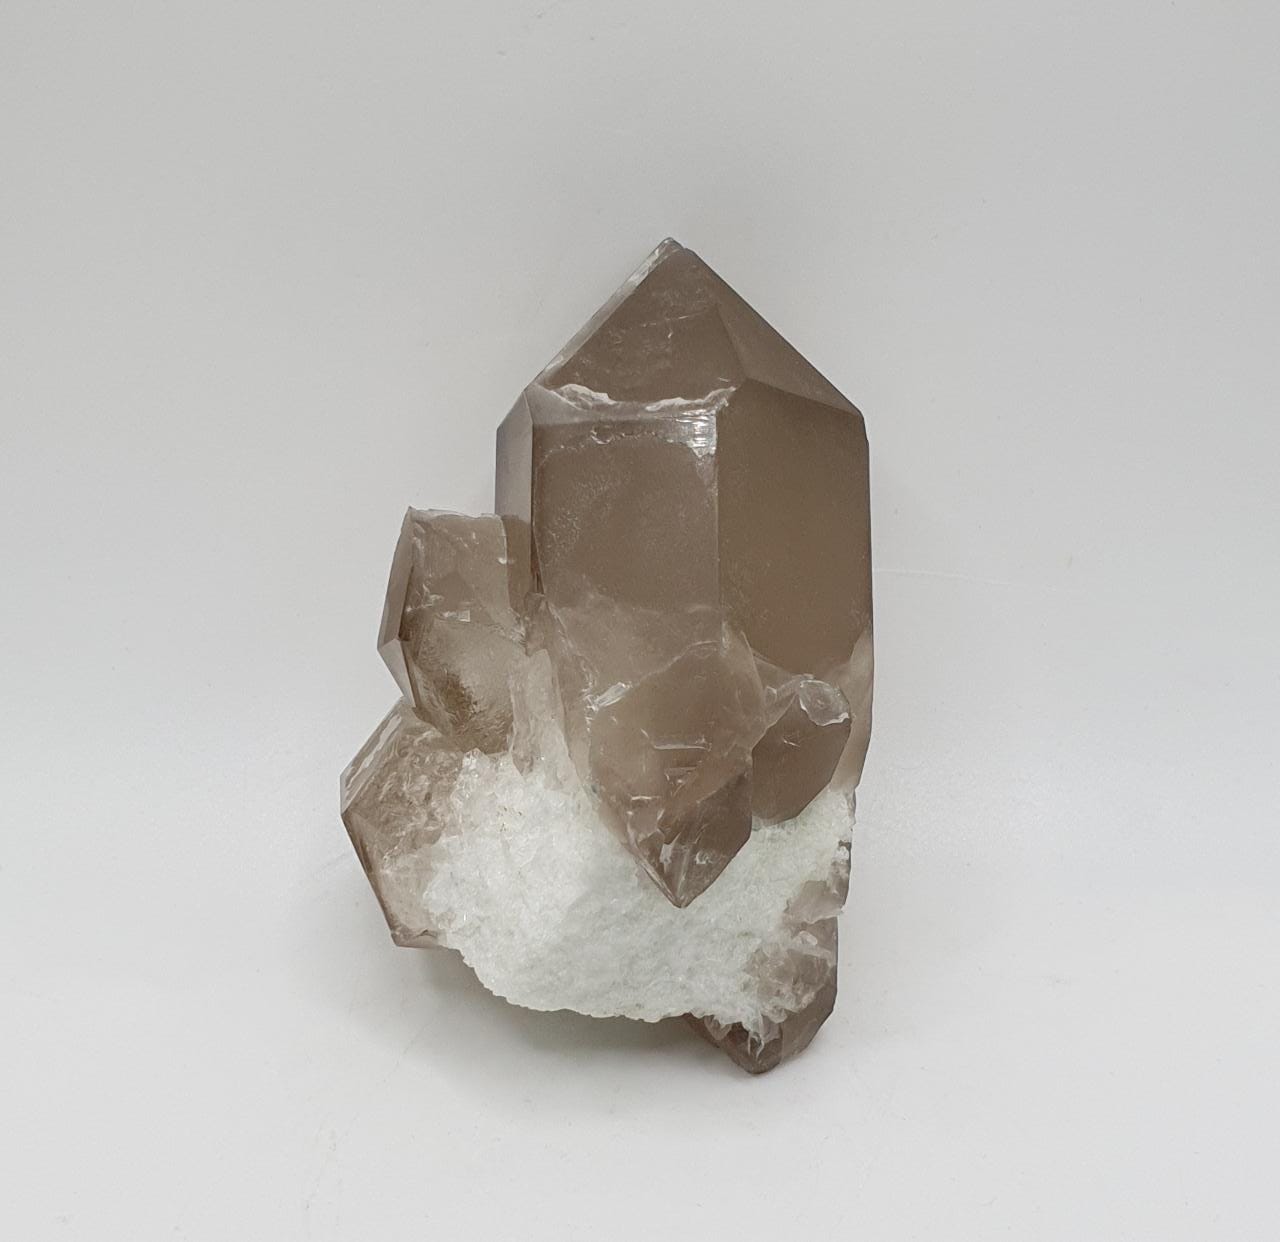 Lovely Smokey Quartz with Perfect Secondary Crystals and Excellent Transparency